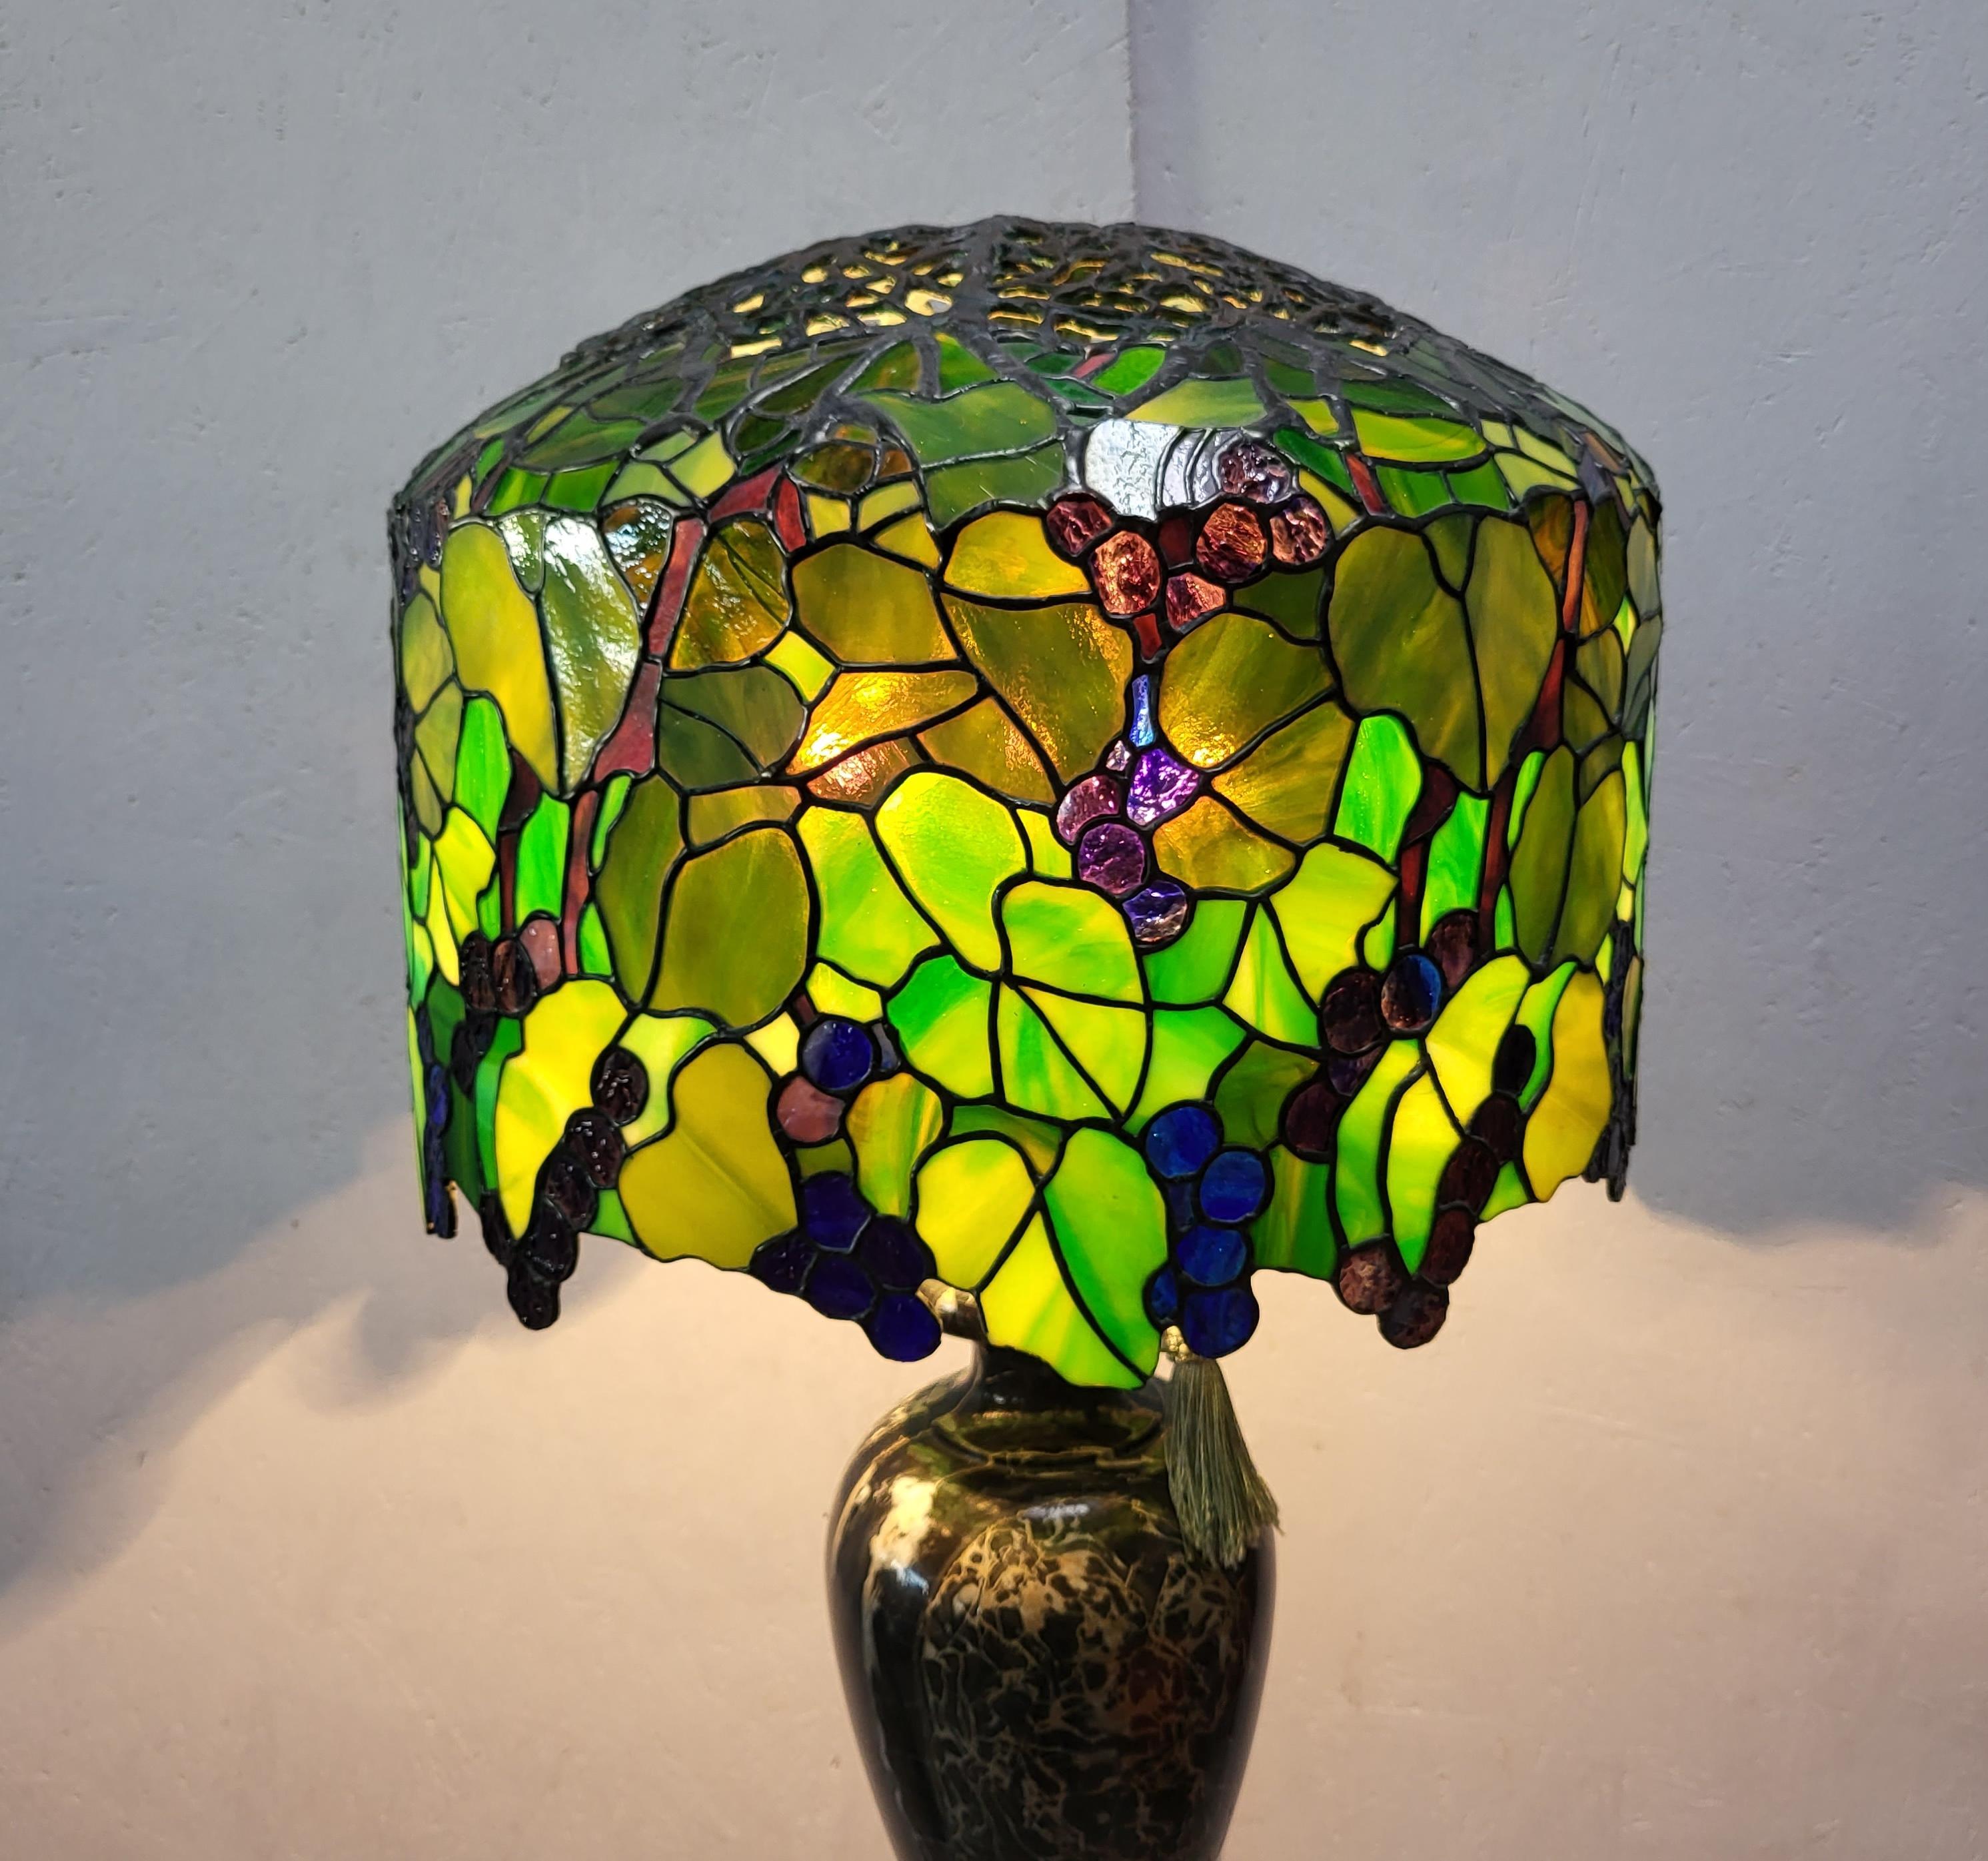 Stunning and amazing lamp in the manner of Tiffany Studios. 
Very impressive handmade lamp with a wonderful Breccia marble base.
 
Very fine handwork, colourful glass.

The lamp has an amazing warm light and is a wonderful art object.
It comes in a